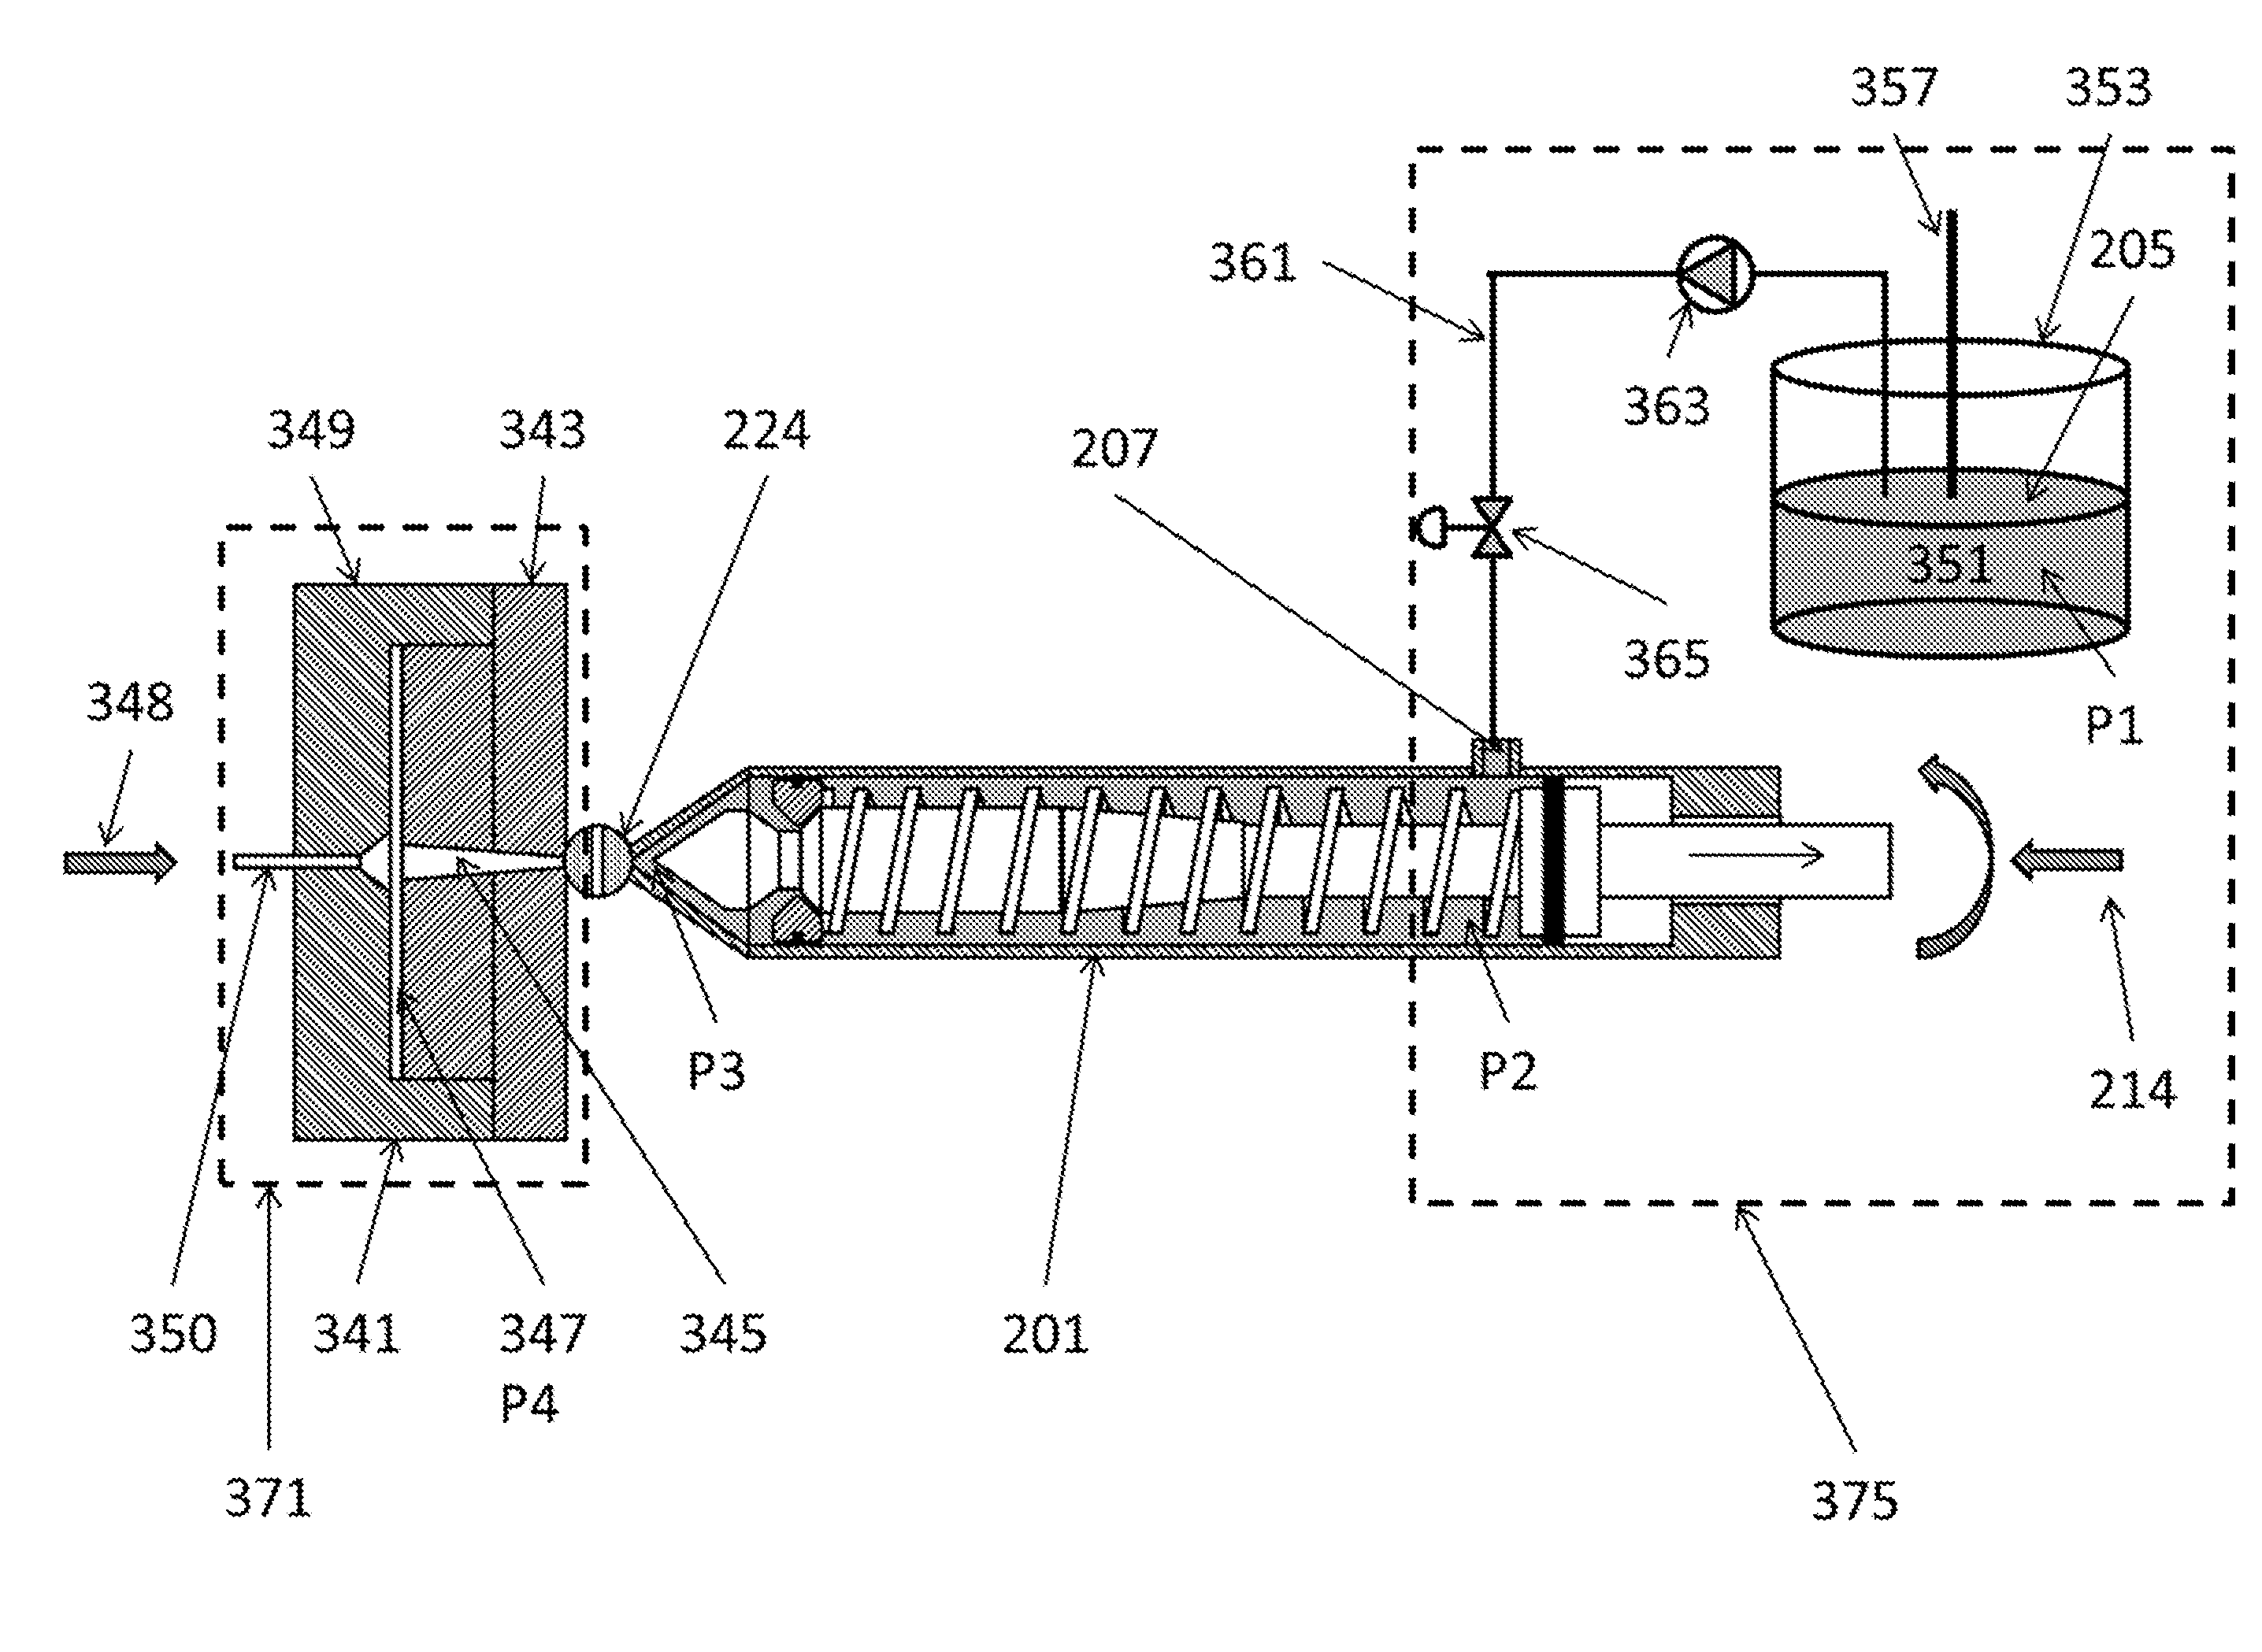 Apparatus and method for the production of expanded foam embryos